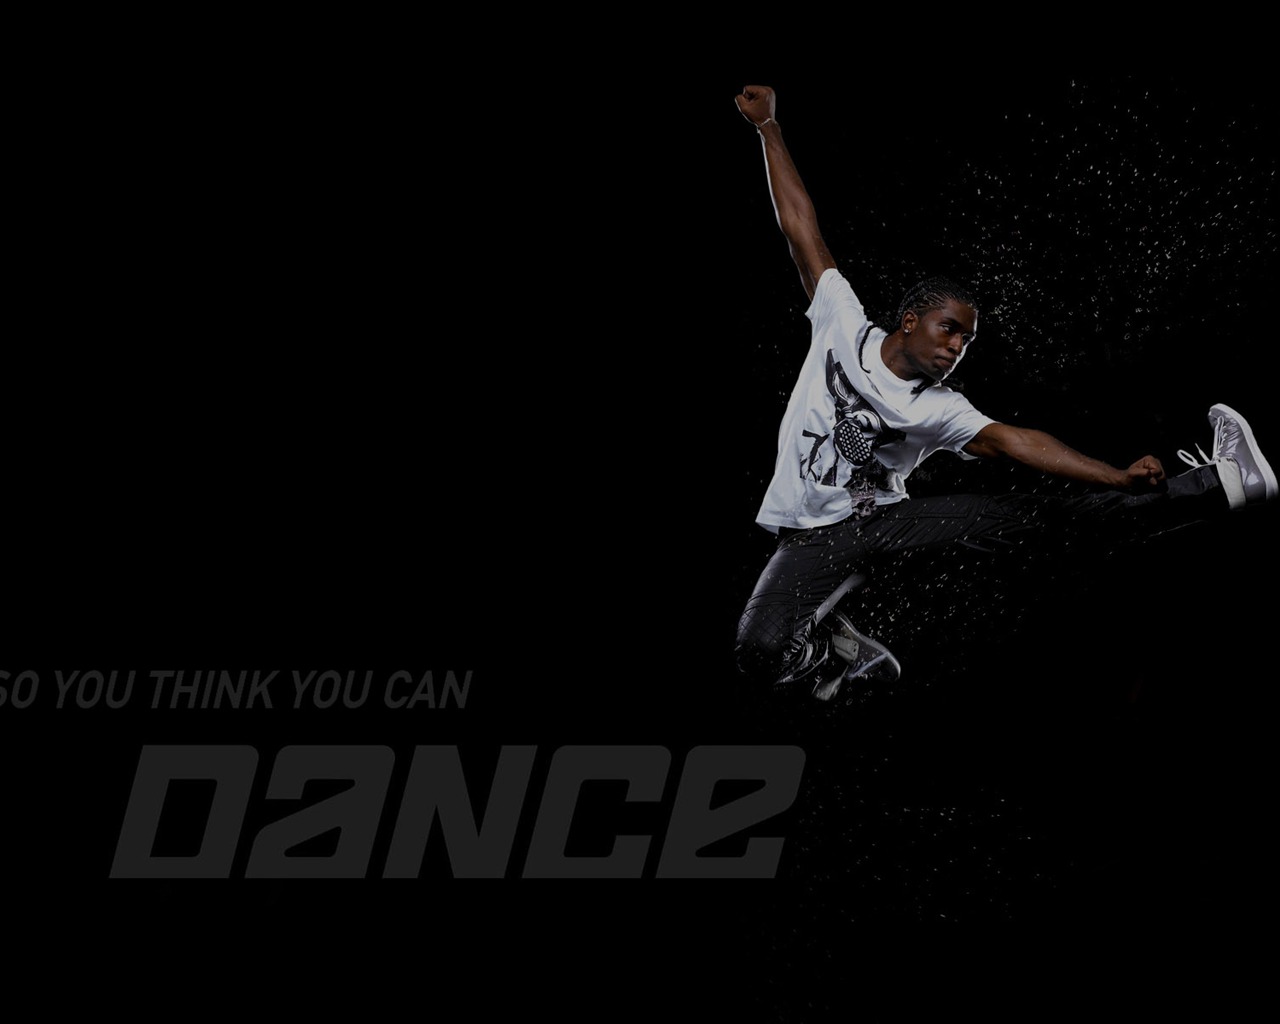 So You Think You Can Dance 舞林争霸 壁纸(二)4 - 1280x1024